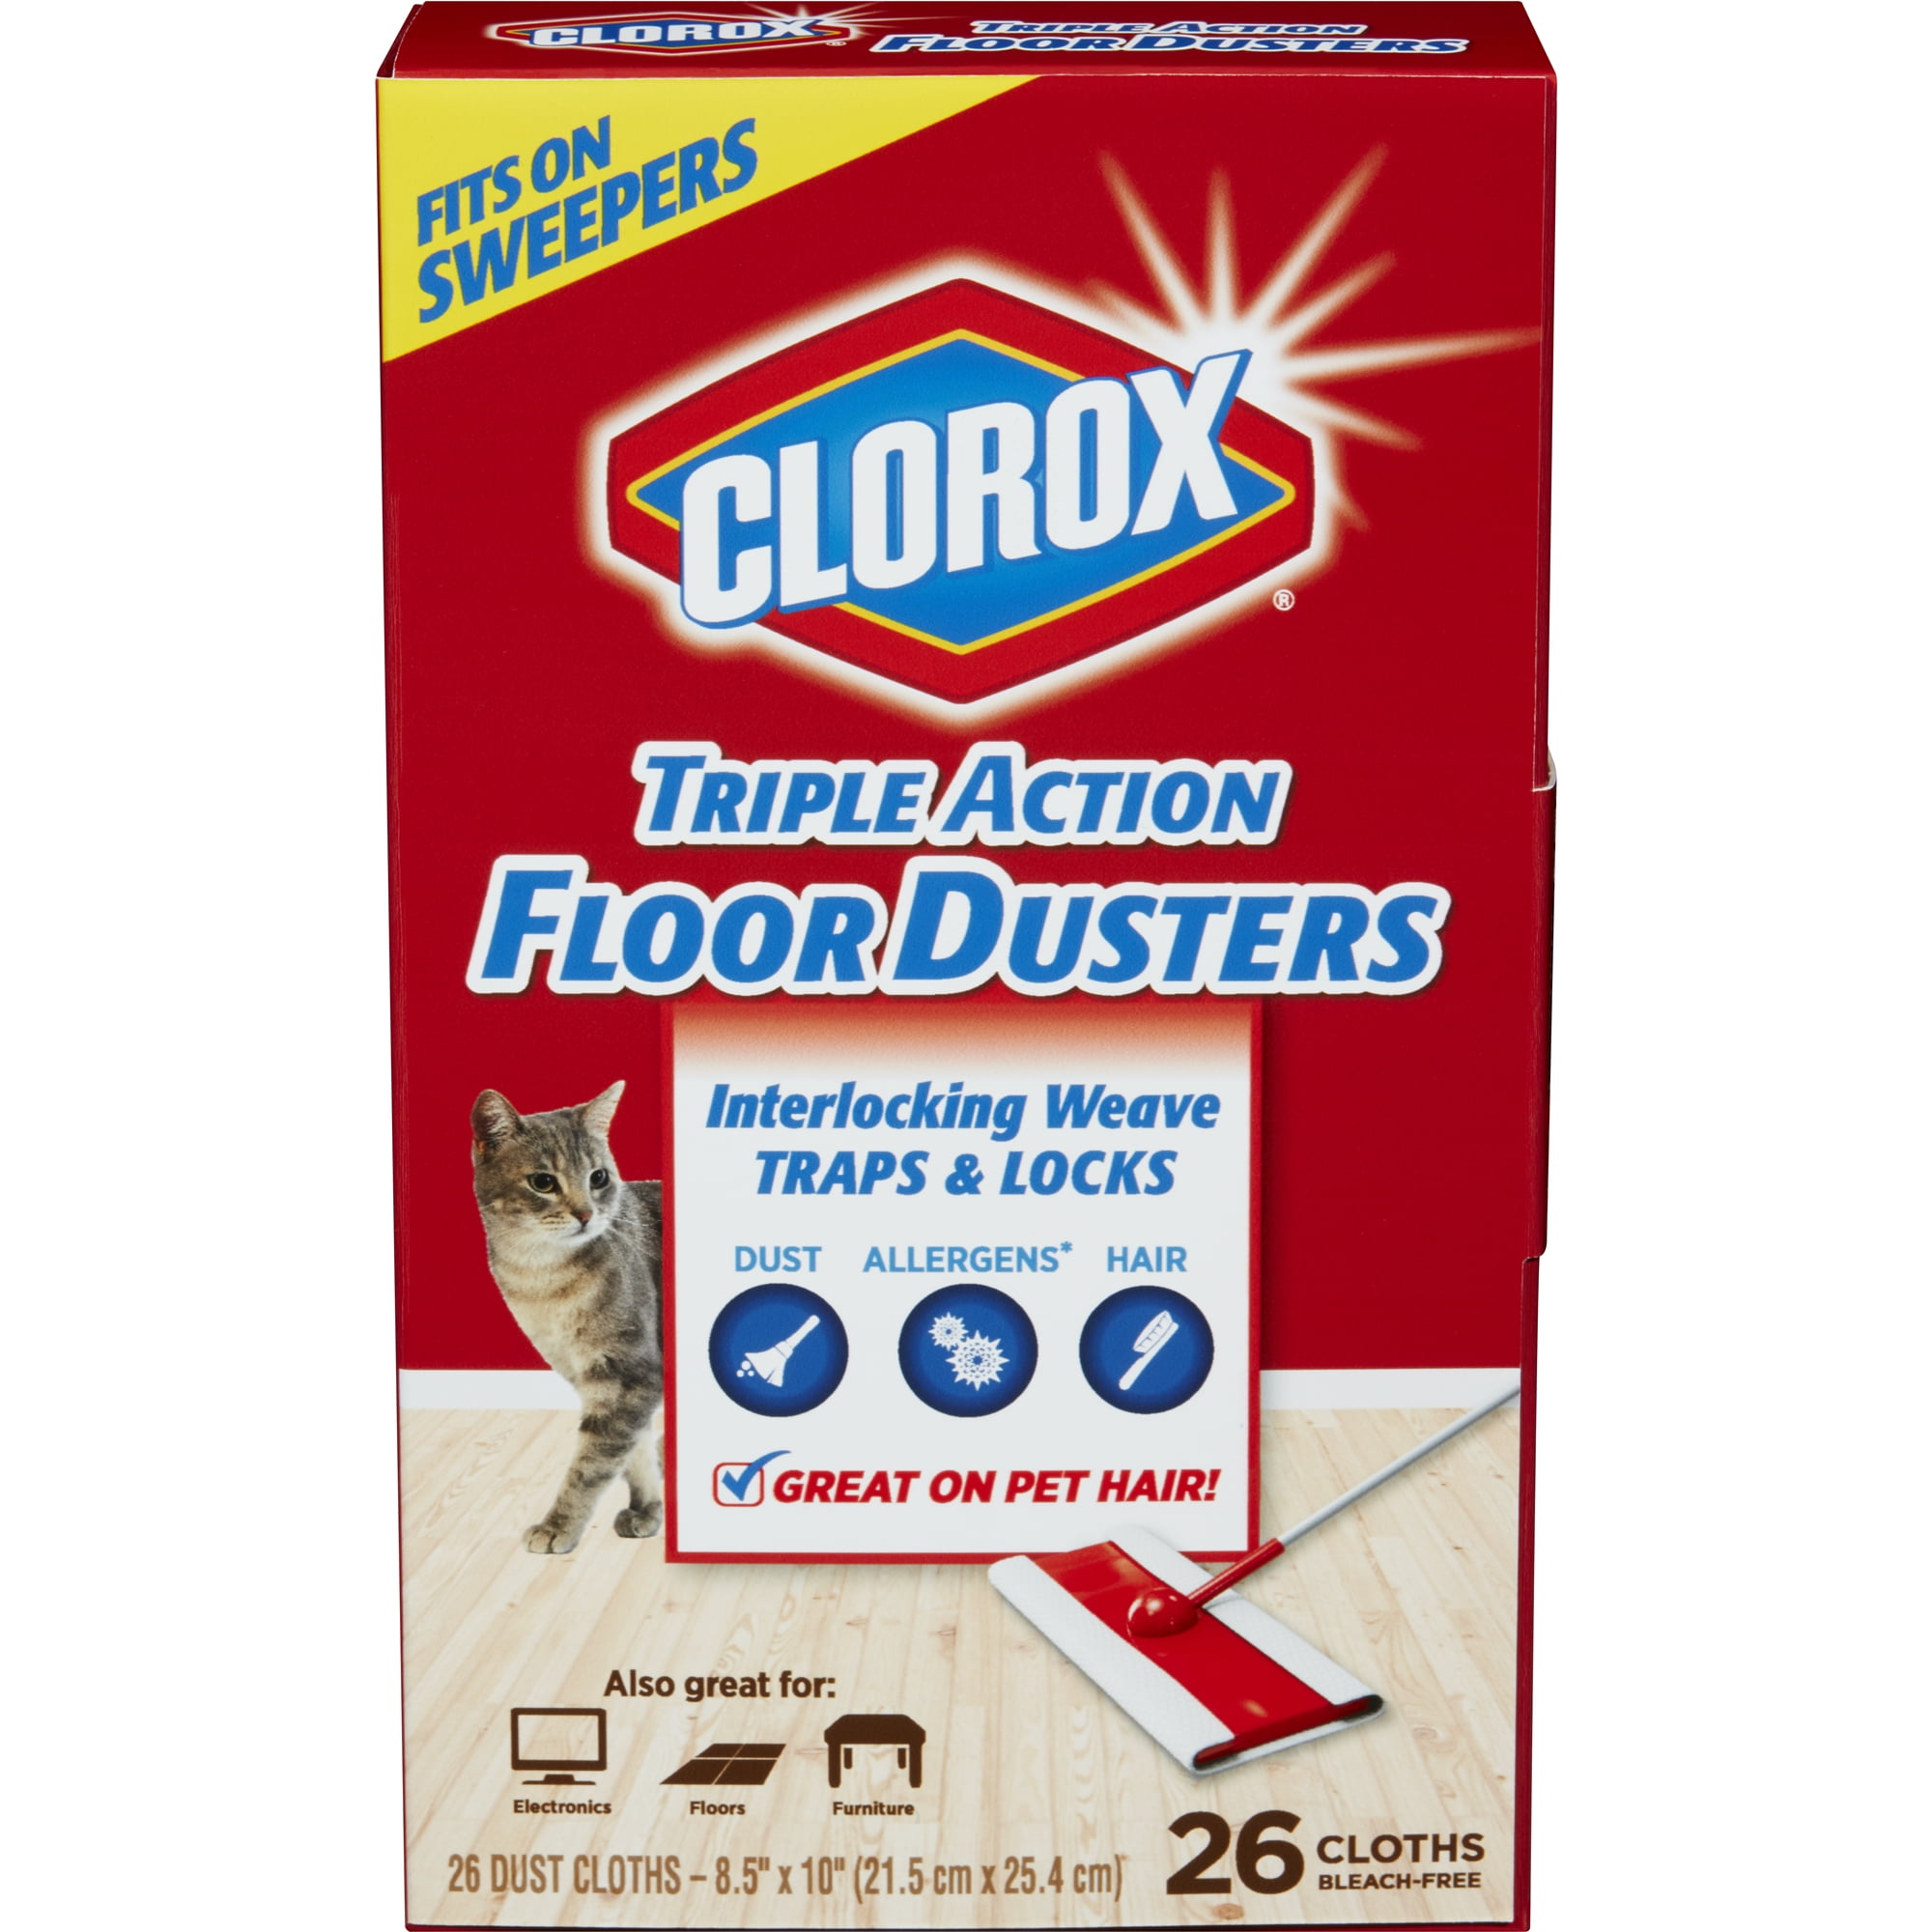 Clorox Triple Action Dust Wipes - 54 Count Each (Pack fo 3) $7.50